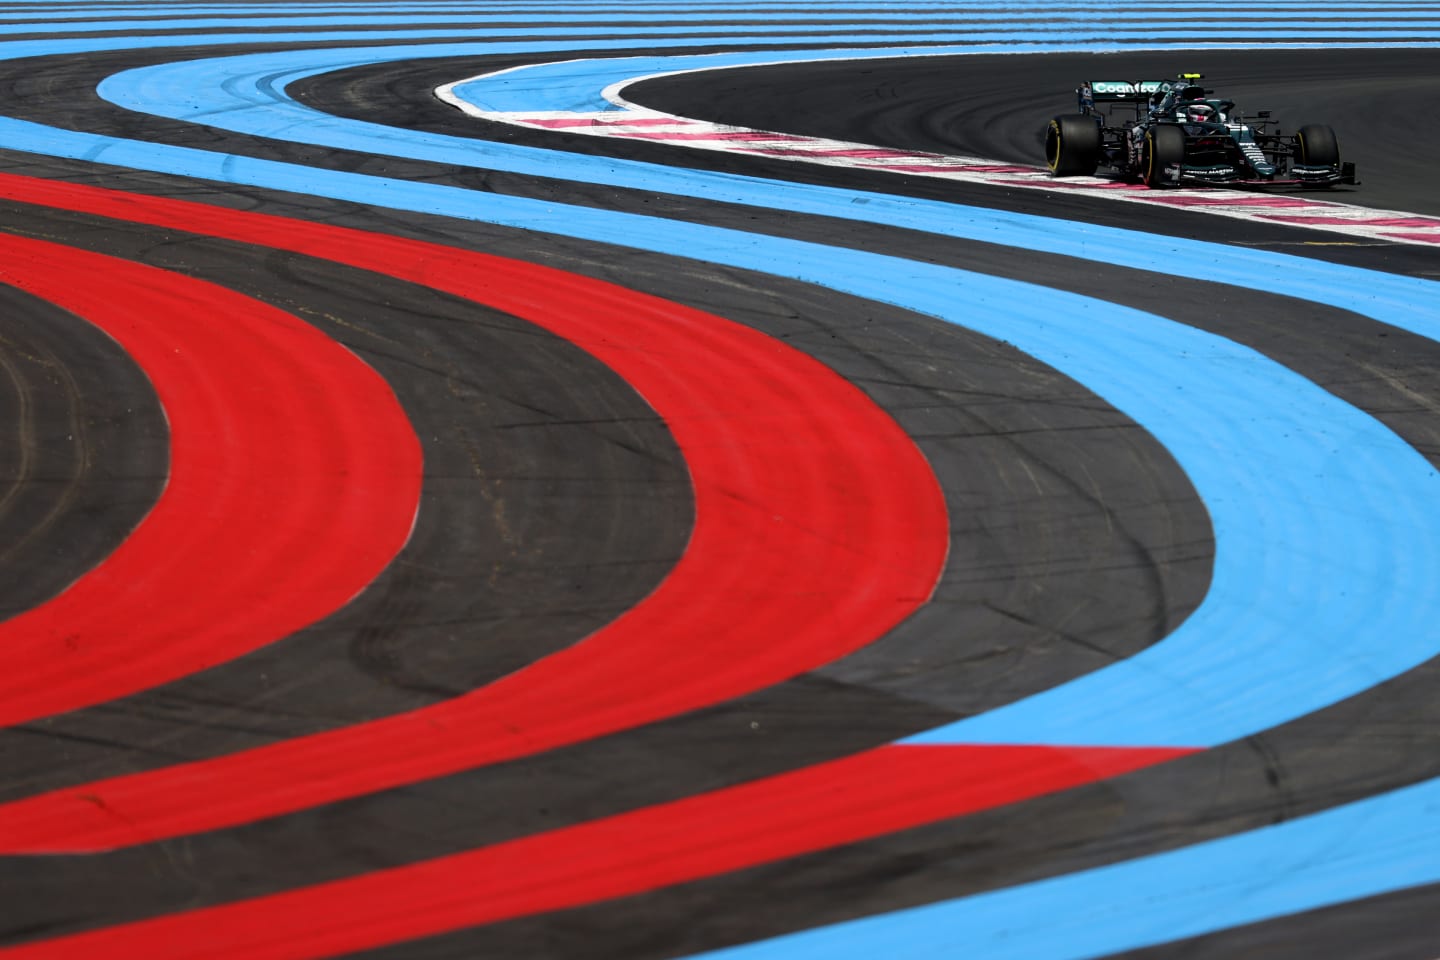 LE CASTELLET, FRANCE - JUNE 18: Sebastian Vettel of Germany driving the (5) Aston Martin AMR21 Mercedes on track during practice ahead of the F1 Grand Prix of France at Circuit Paul Ricard on June 18, 2021 in Le Castellet, France. (Photo by Clive Rose/Getty Images)